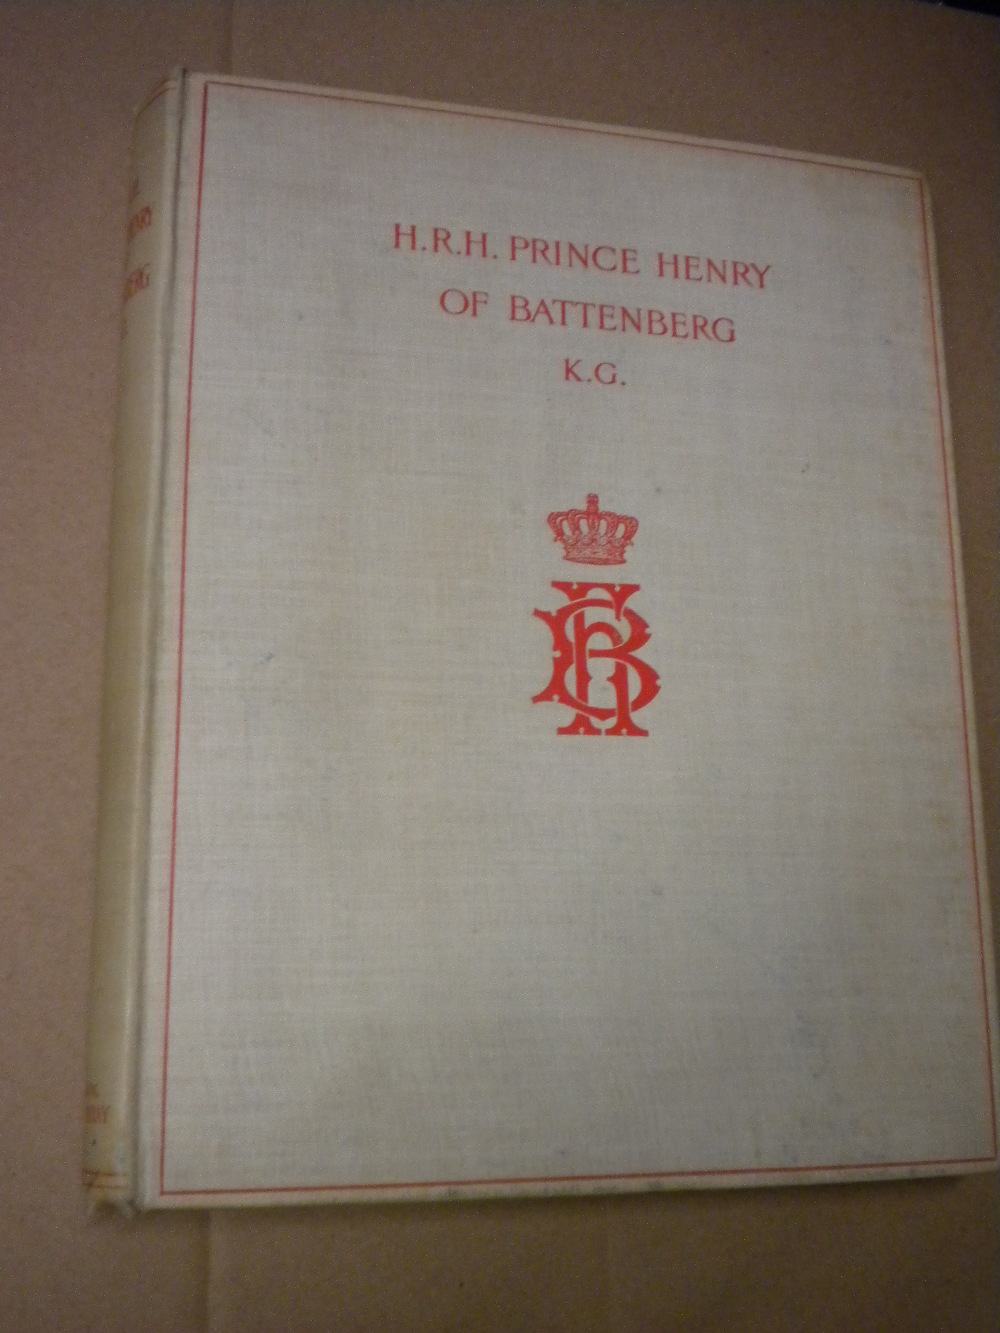 HRH Prince Henry of Battenburg' printed for private circulation in 1887, signed by Princess